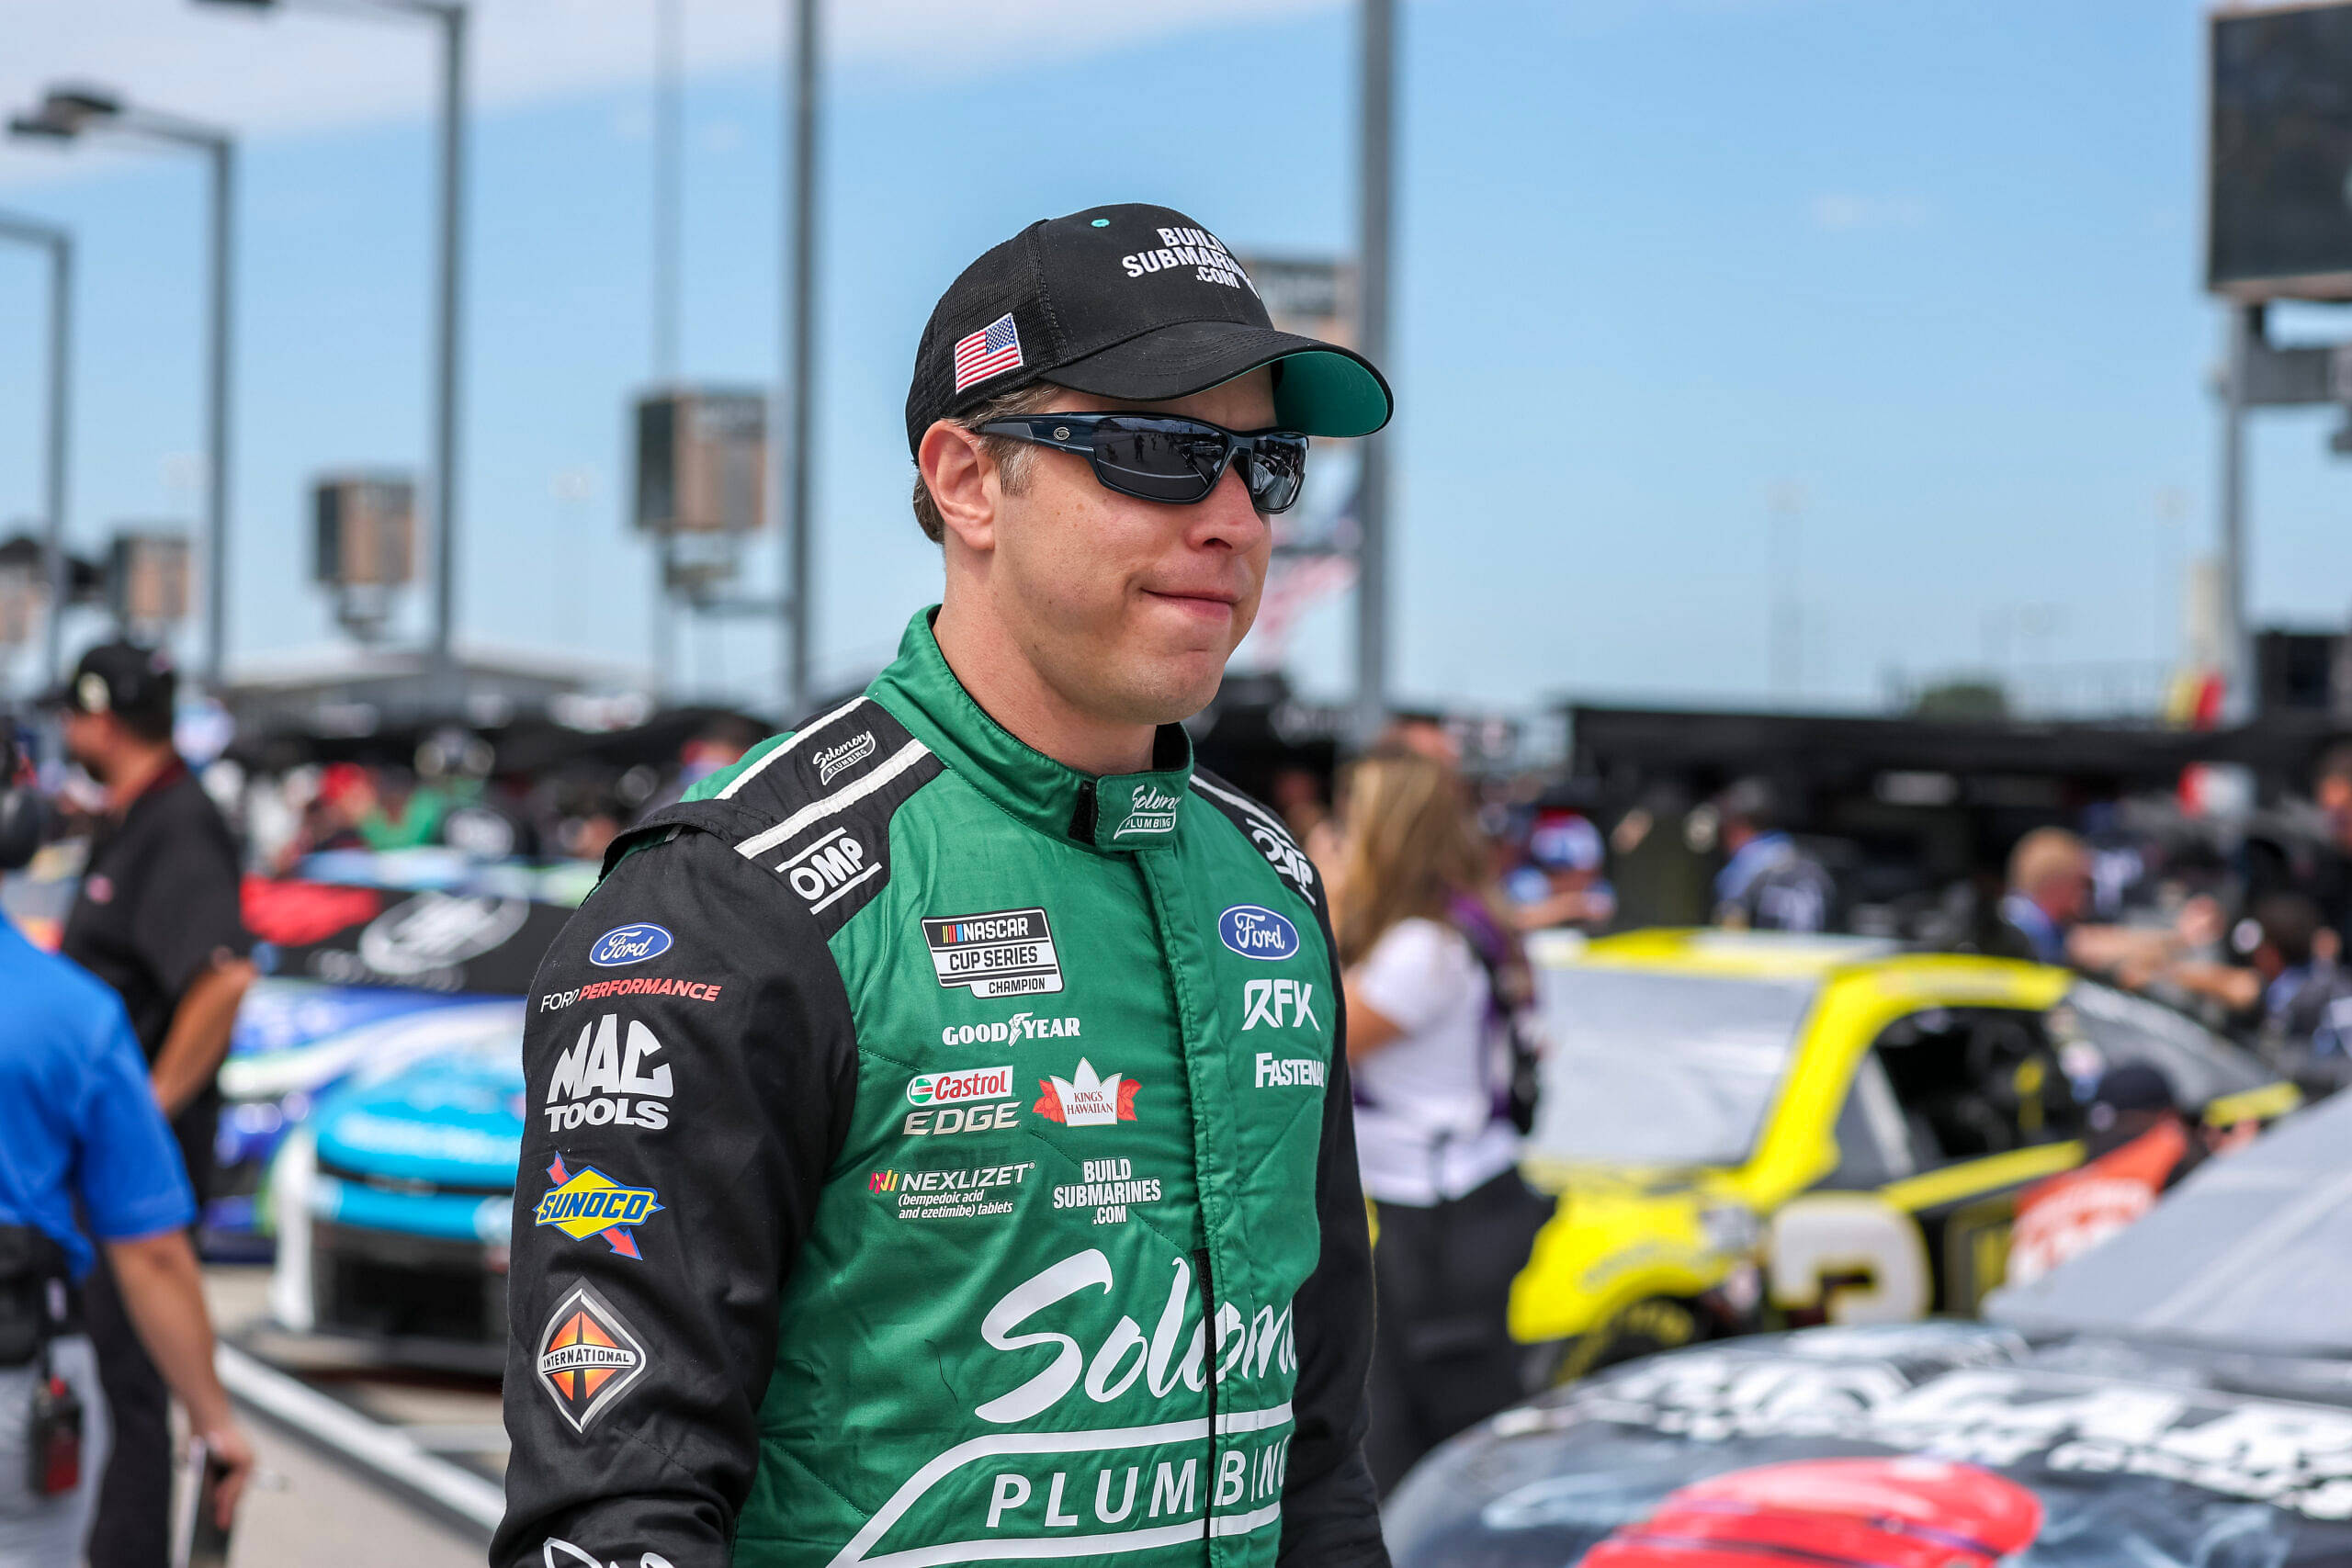 “Worst Racing to Watch” Brad Keselowski Registers Strong Plea With NASCAR After Kansas Race